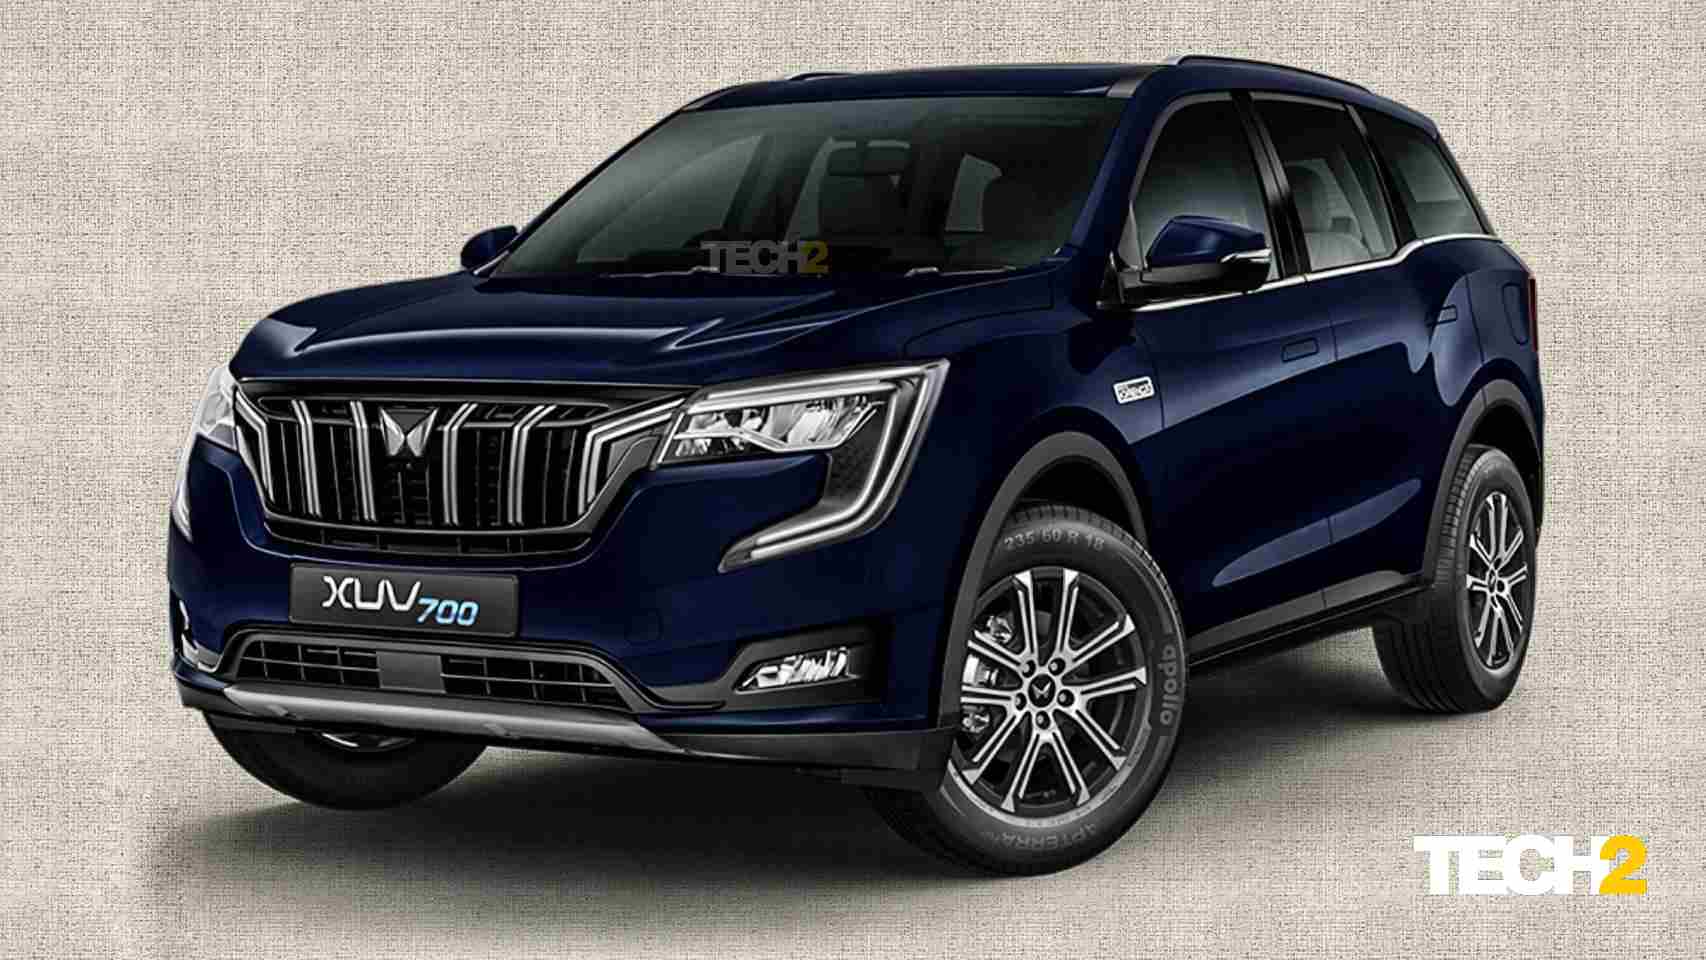 Mahindra XUV700 in picture: Take a look at its exterior, interior, features, powertrains and more- Technology News, Firstpost